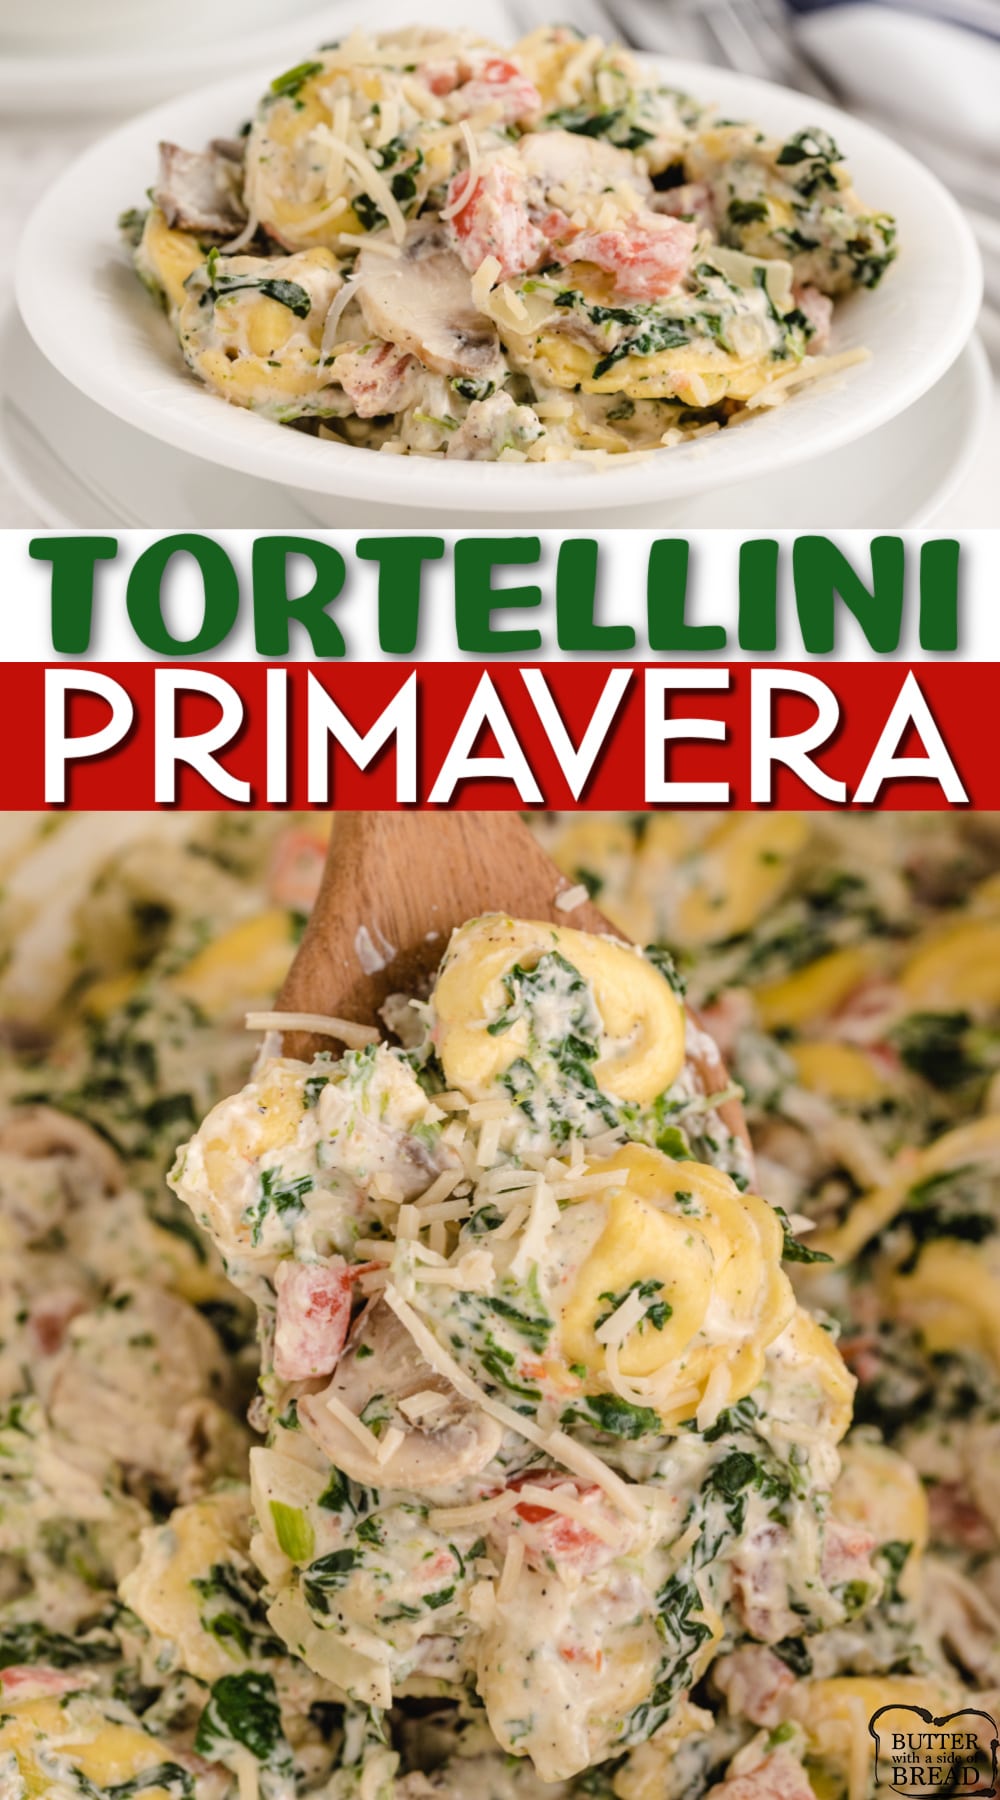 Tortellini Primavera is a light and creamy pasta dish that is made with tons of vegetables and cheese tortellini. Delicious pasta recipe that is perfect for an easy weeknight dinner!  